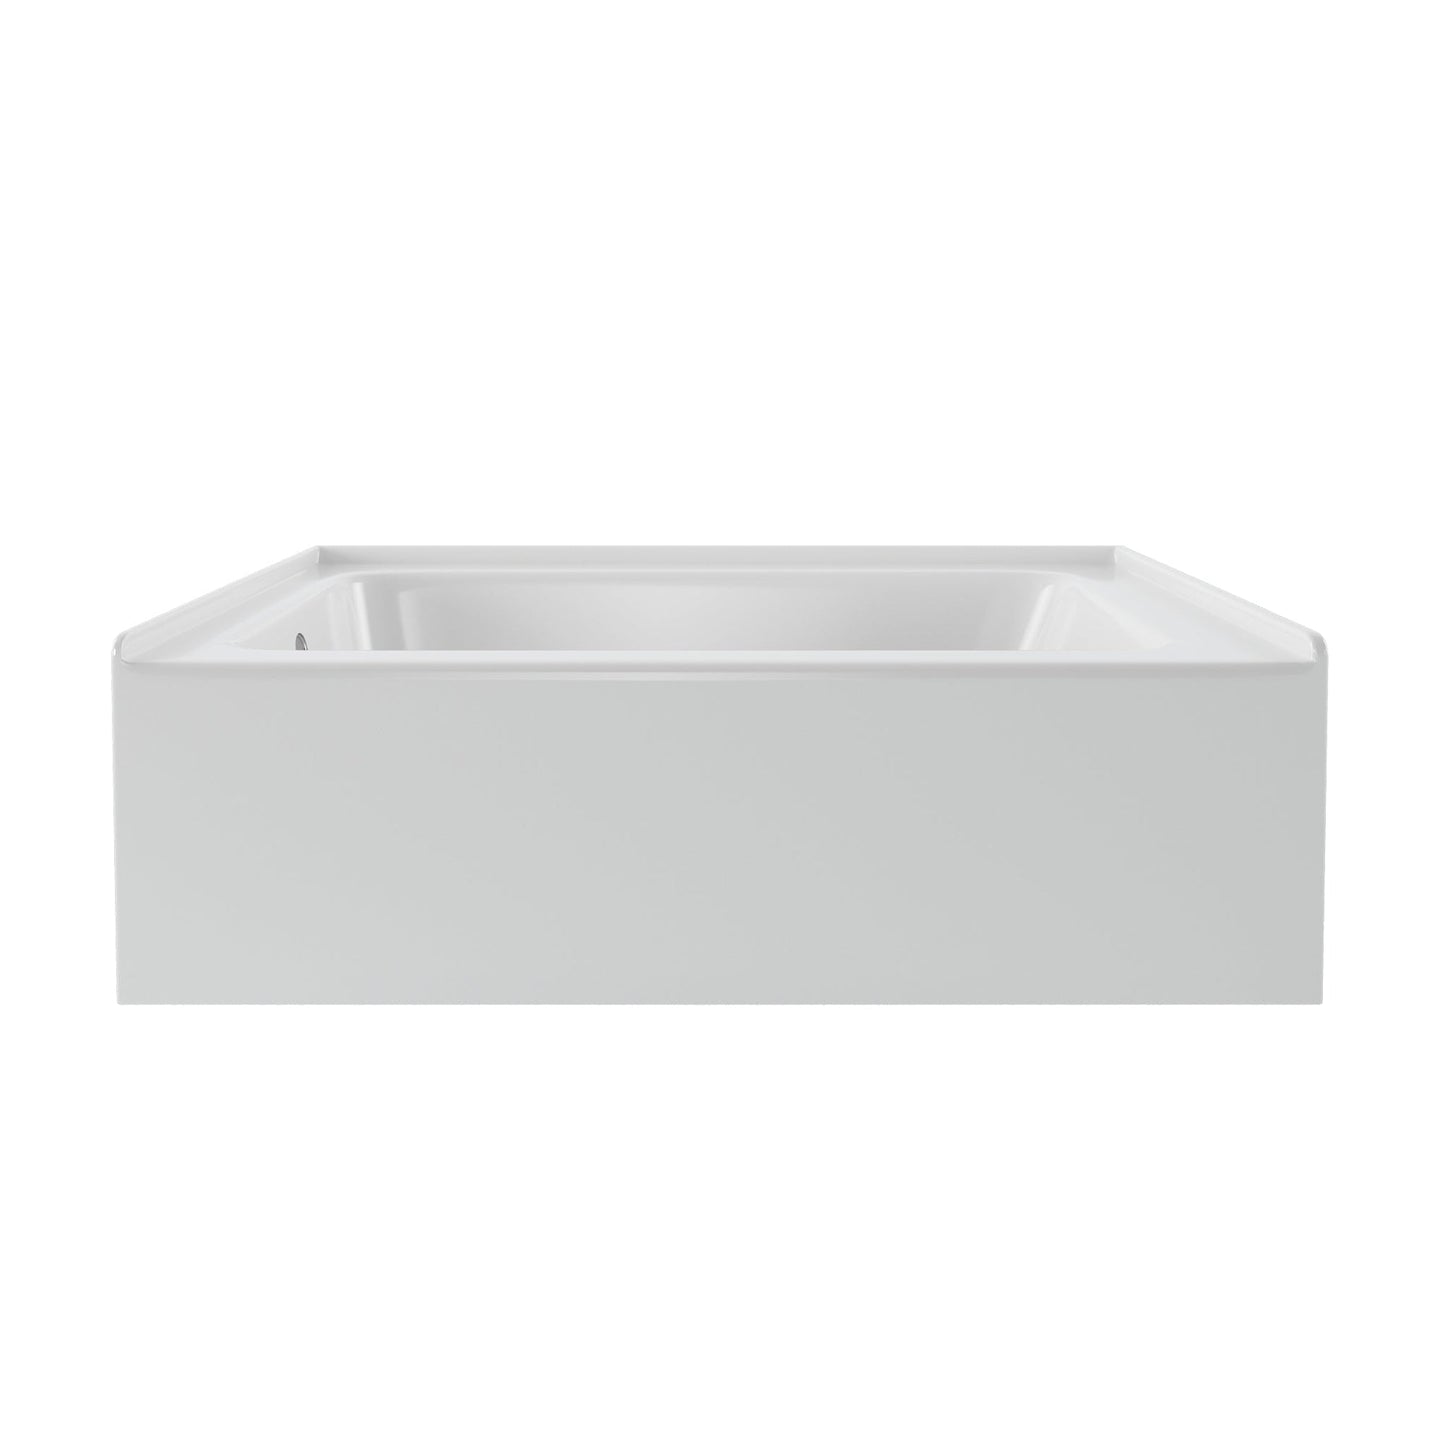 PULSE ShowerSpas 60" W x 30" D Rectangular Glossy White Acrylic Finish Left Drain Placement Alcove Tub